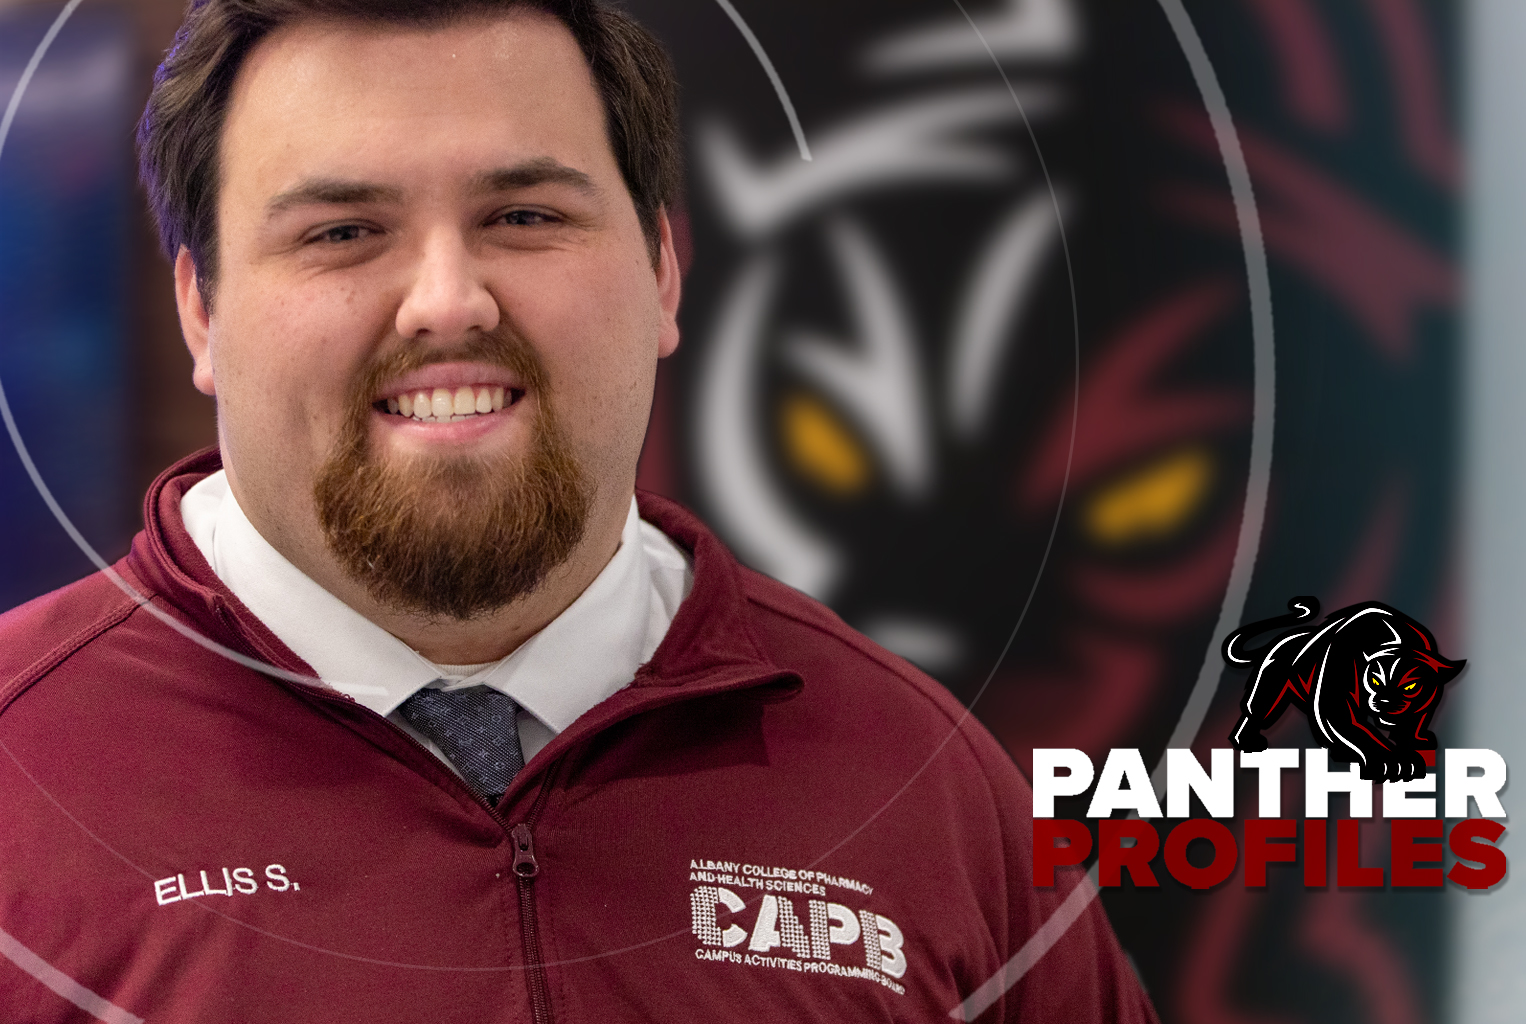 Pharmacy student Russell Ellis Simerly in a Panther Profile frame